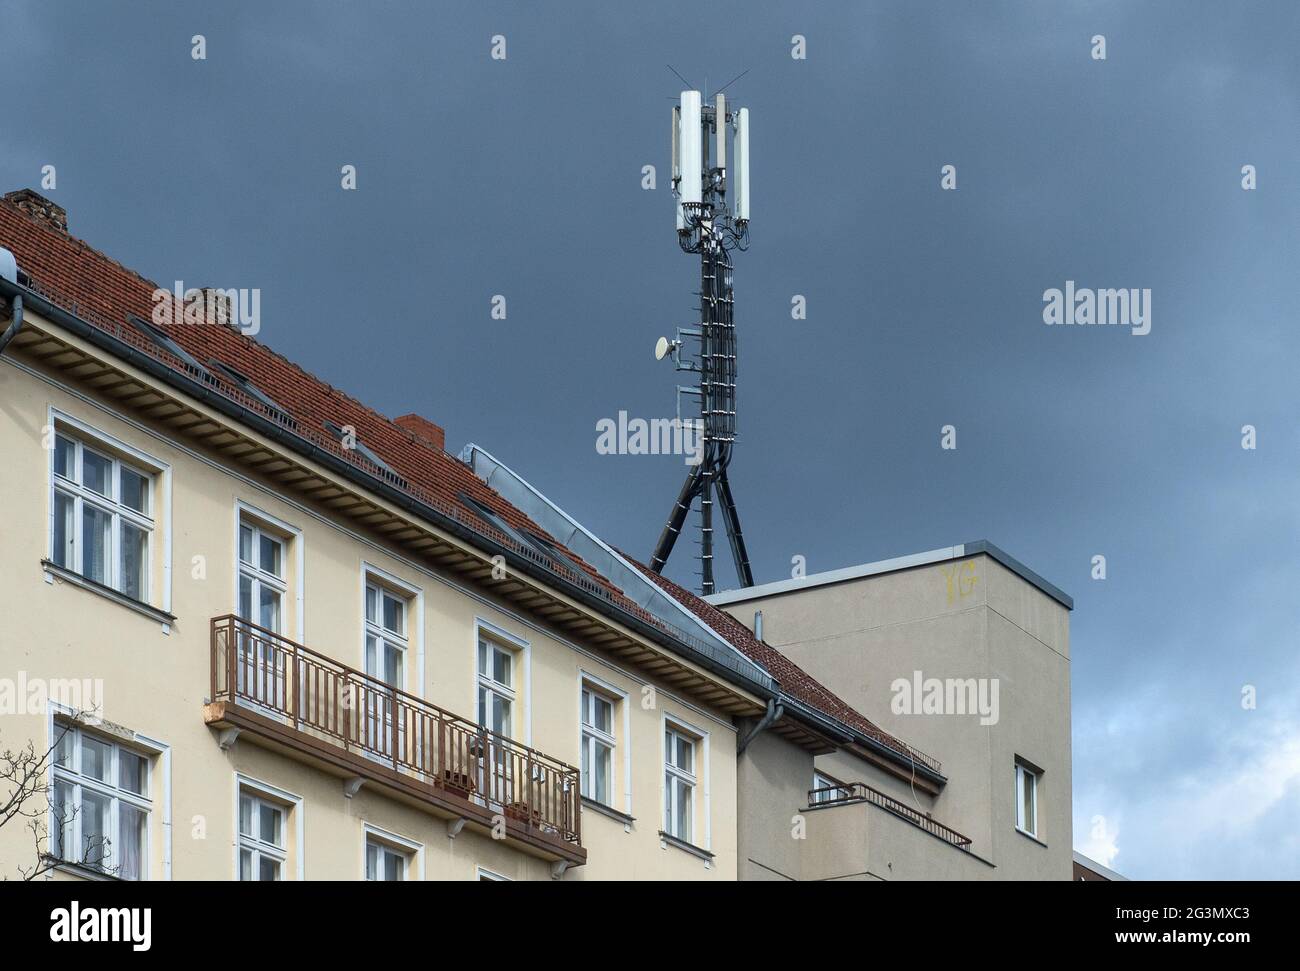 13.04.2021, Berlin, Berlin, Germany - Mitte - Mobile phone antennas on the  roof of a residential building. 0CE210413D001CAROEX.JPG [MODEL RELEASE: NO  Stock Photo - Alamy